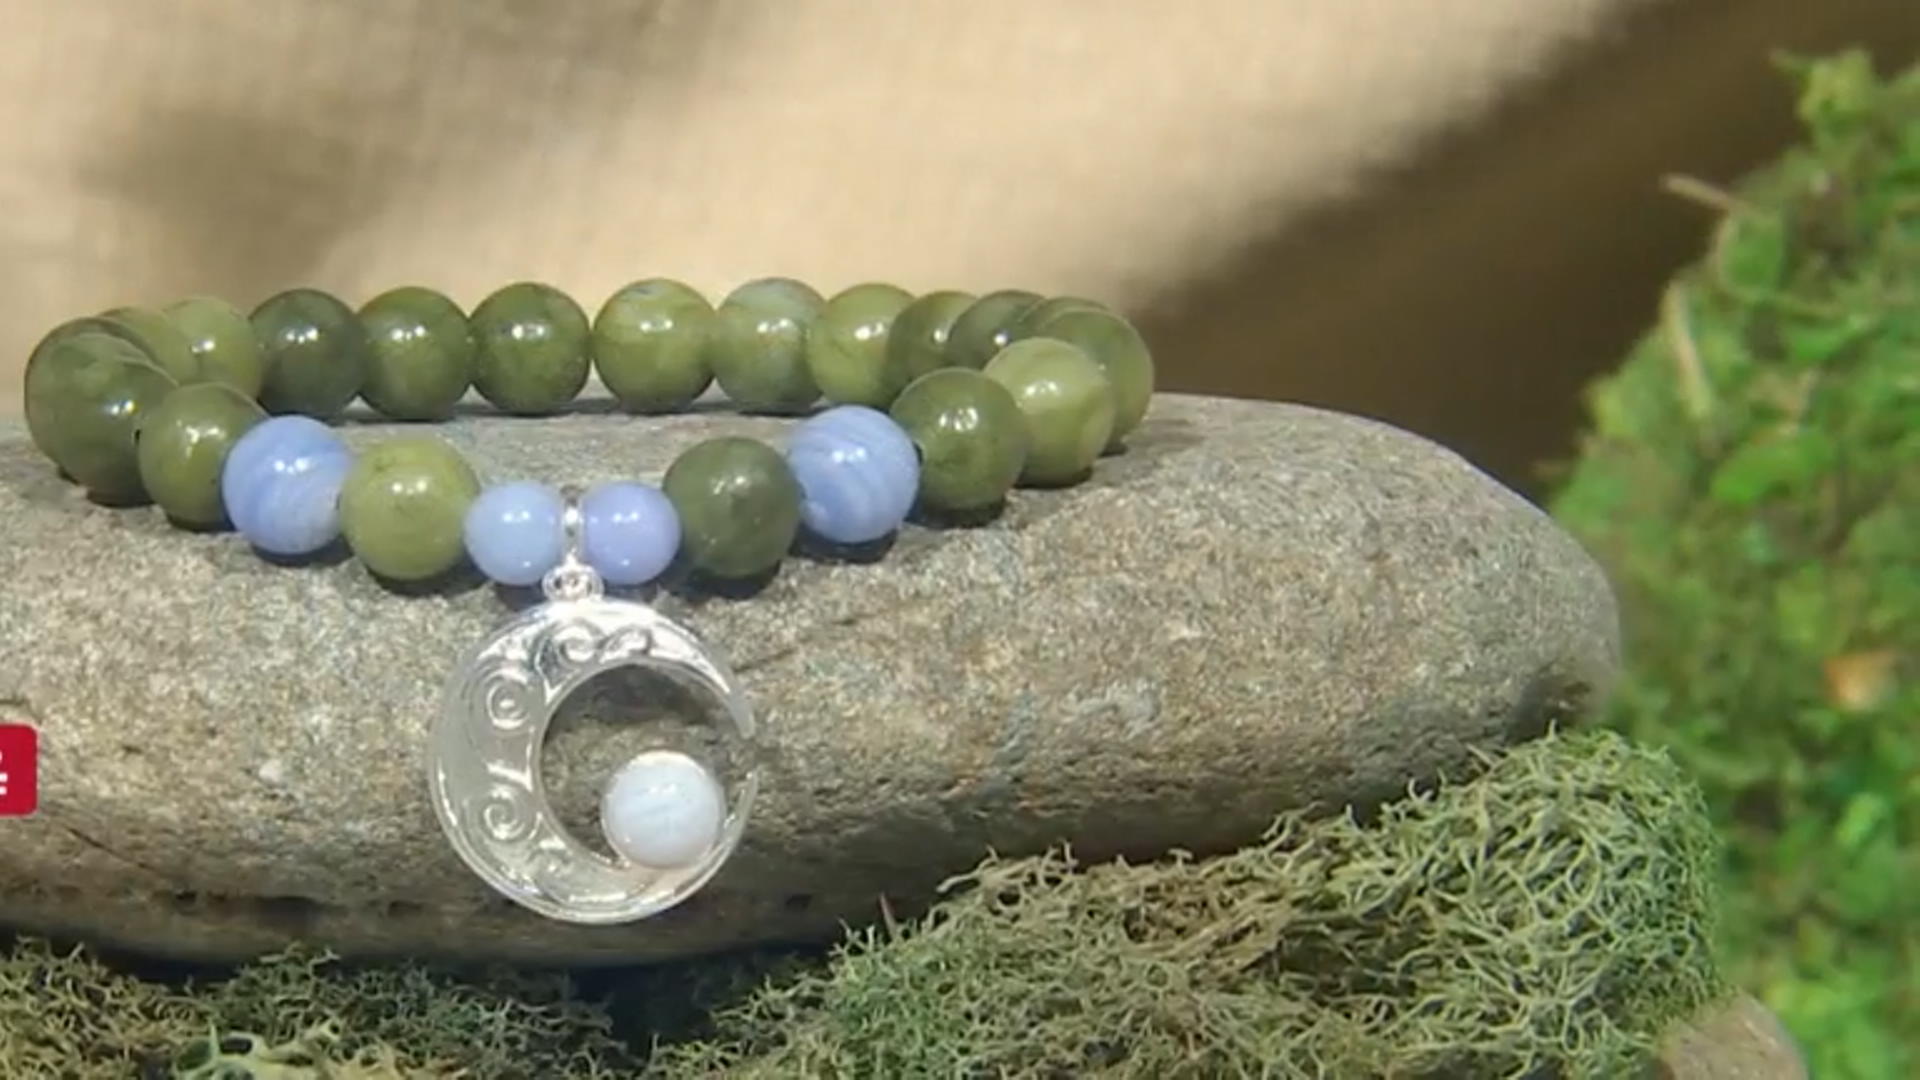 Blue Lace Agate & Green Connemara Marble Silver Tone Over Moon Stretch Bracelet Video Thumbnail